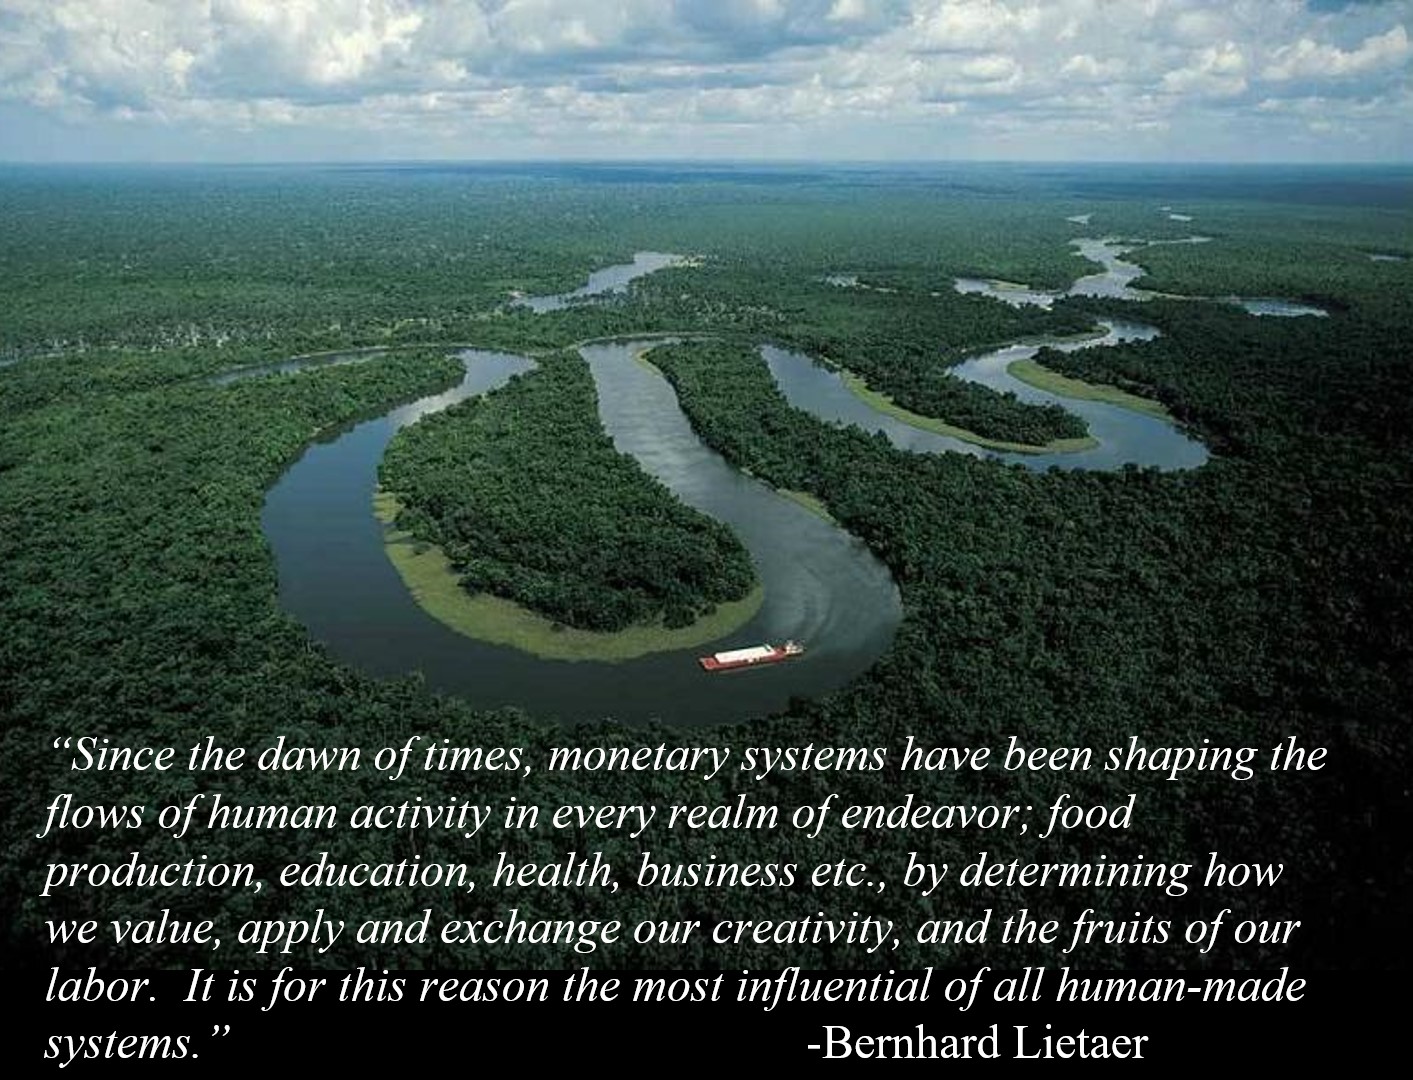 Image of river bend '... monetary systems have been shaping the flows of human activity ...